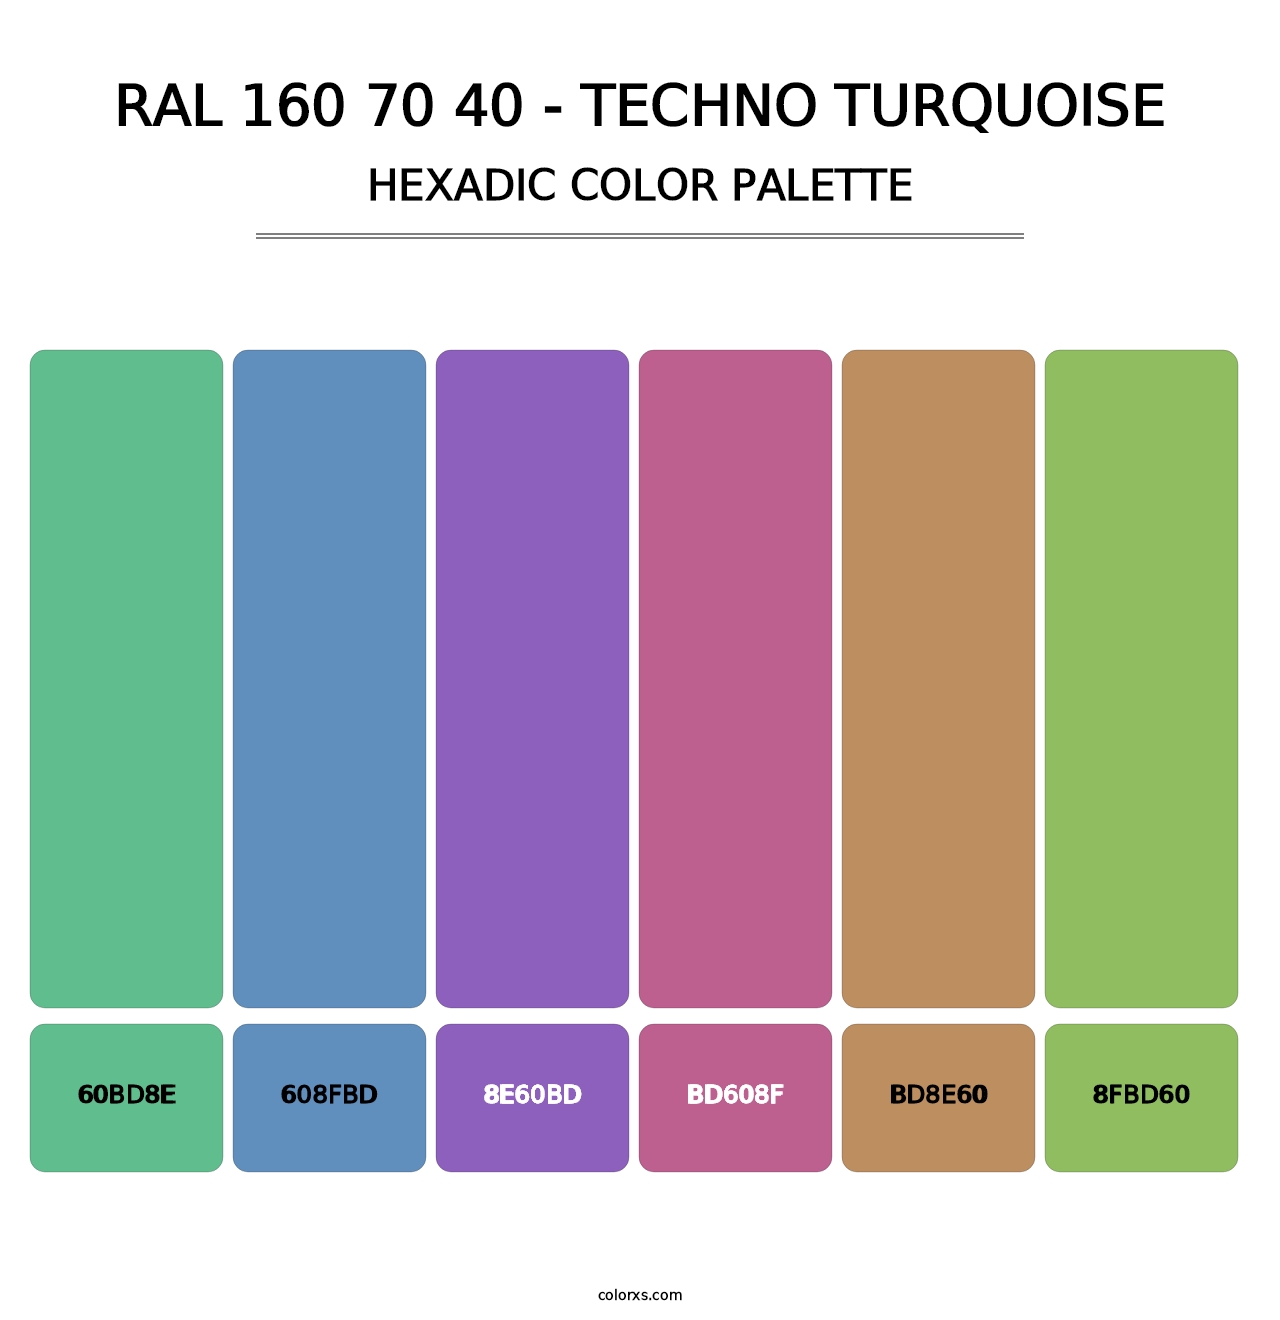 RAL 160 70 40 - Techno Turquoise - Hexadic Color Palette